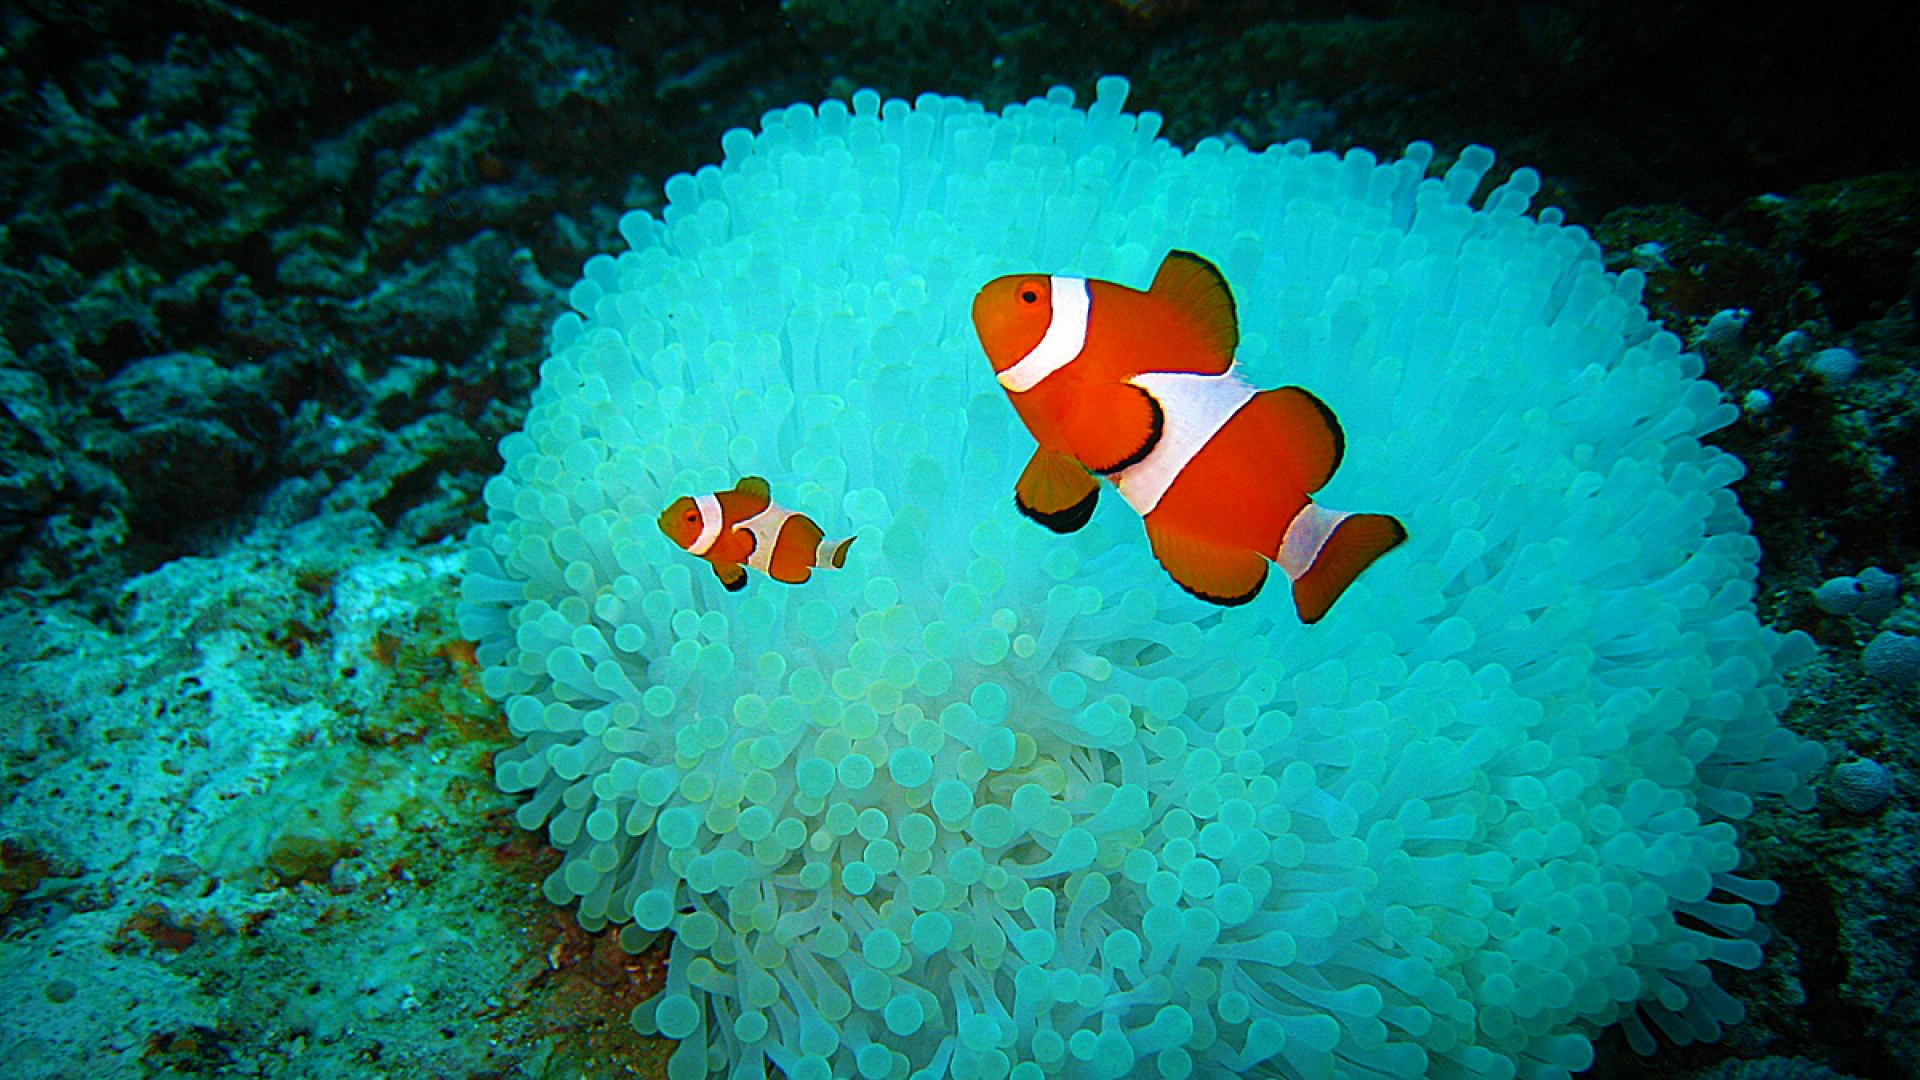 Free Download Clown Fish Wallpapers 1920x1080